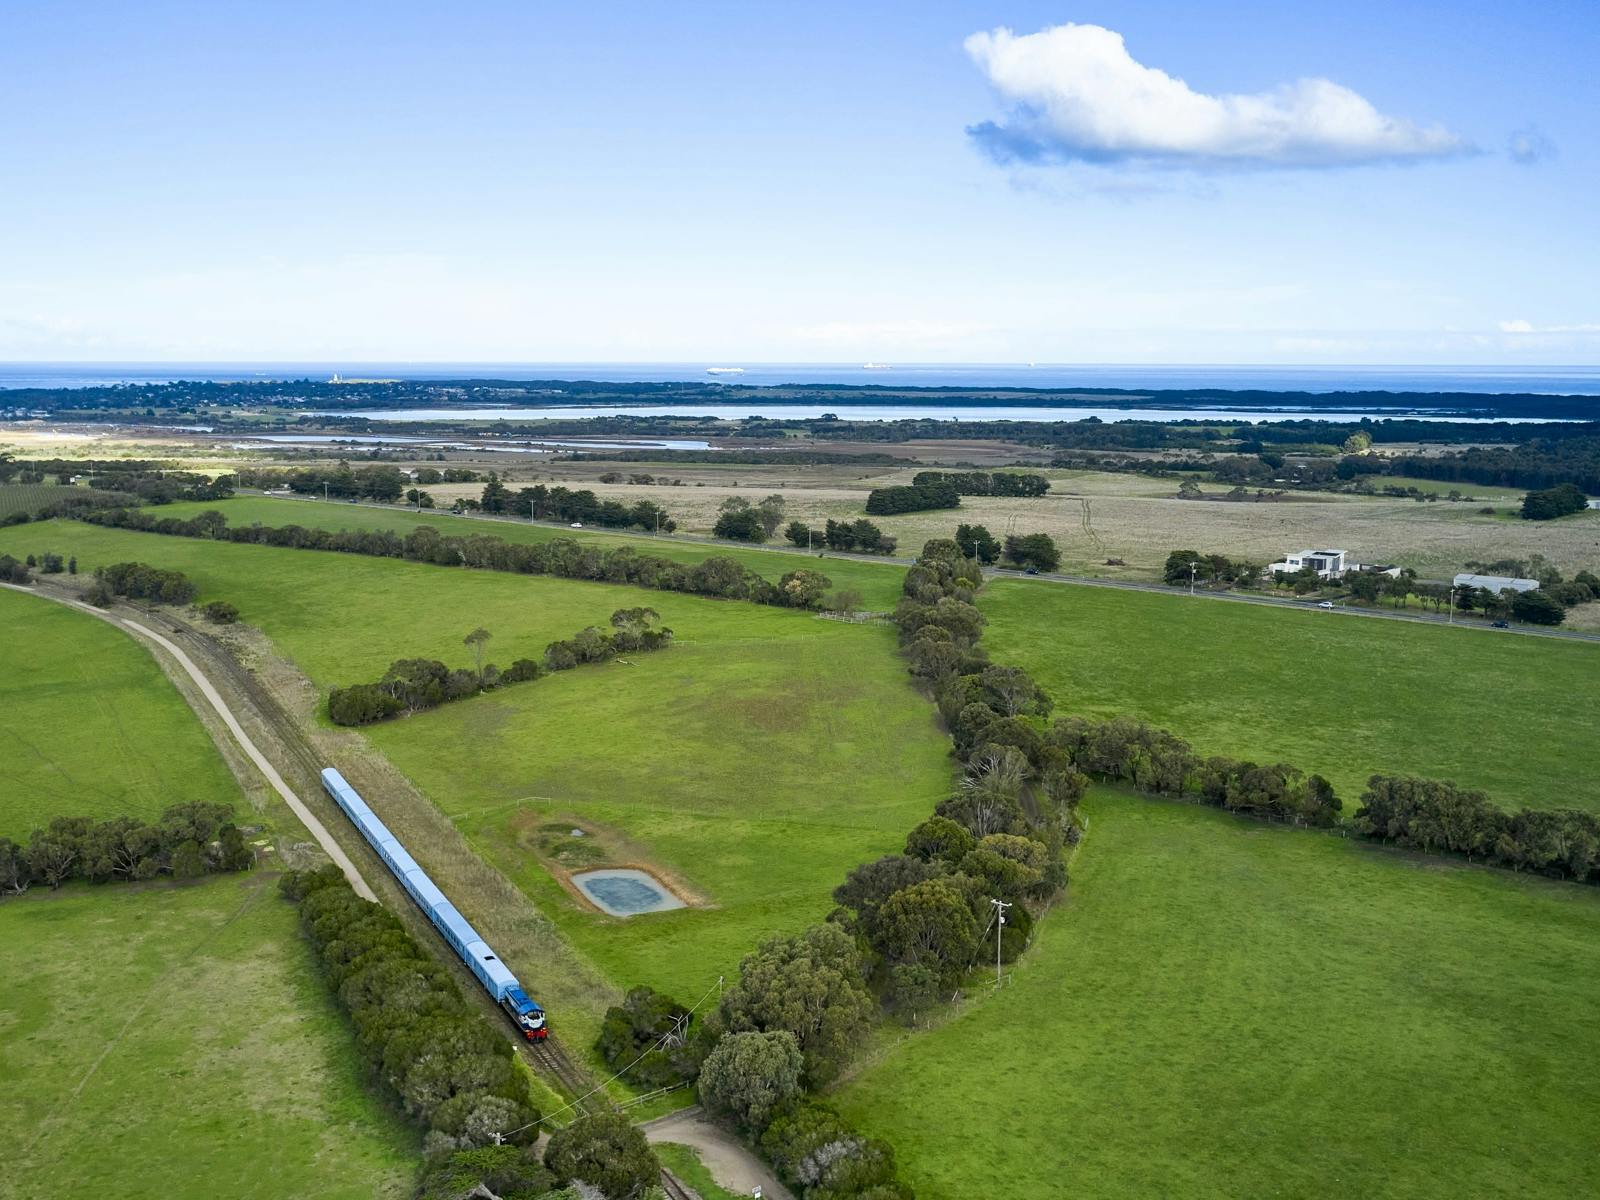 Blue train with 8 carriages and diesel locomotive passes through farmland